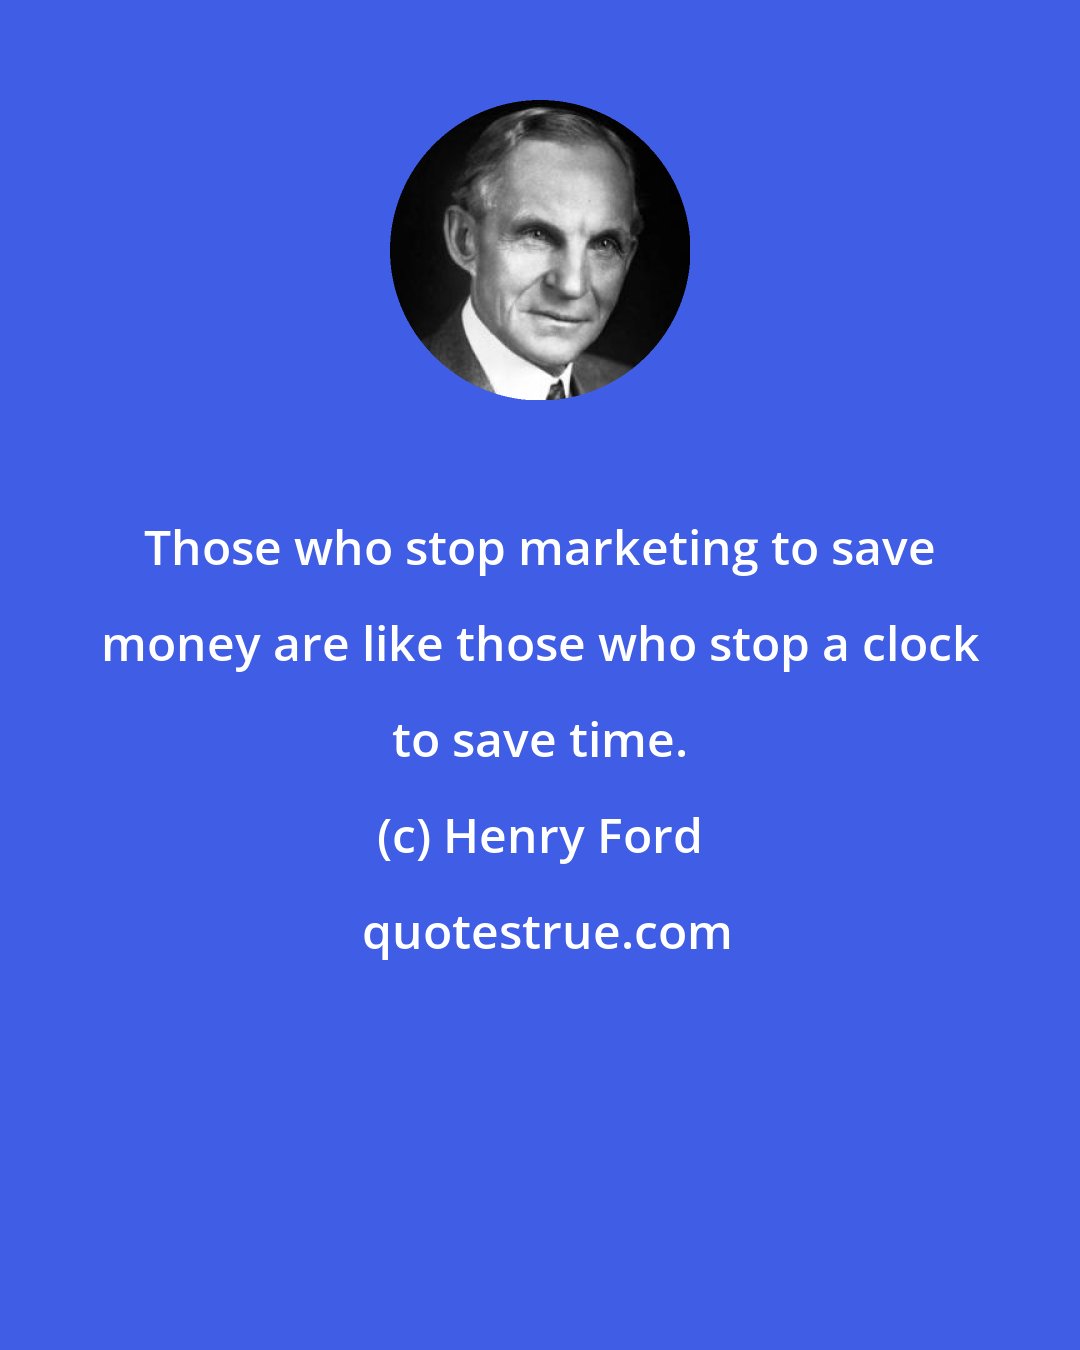 Henry Ford: Those who stop marketing to save money are like those who stop a clock to save time.